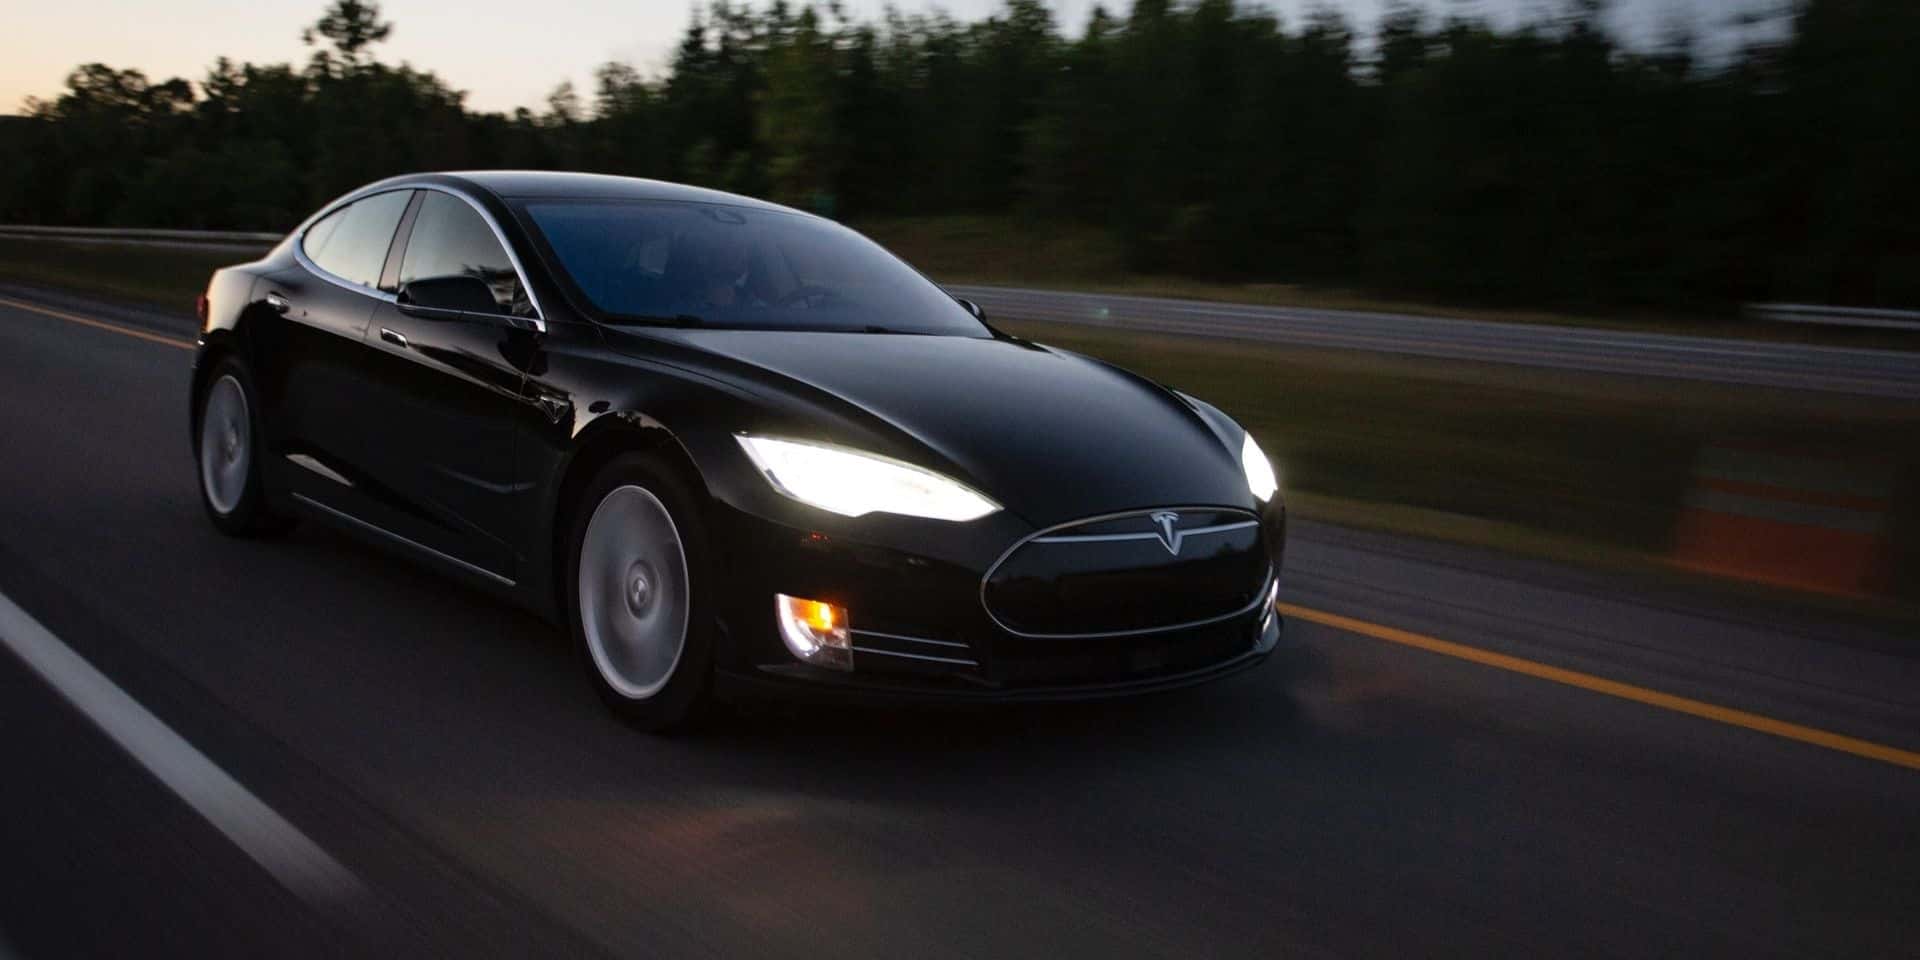 Picture of a Tesla model s driving on a road